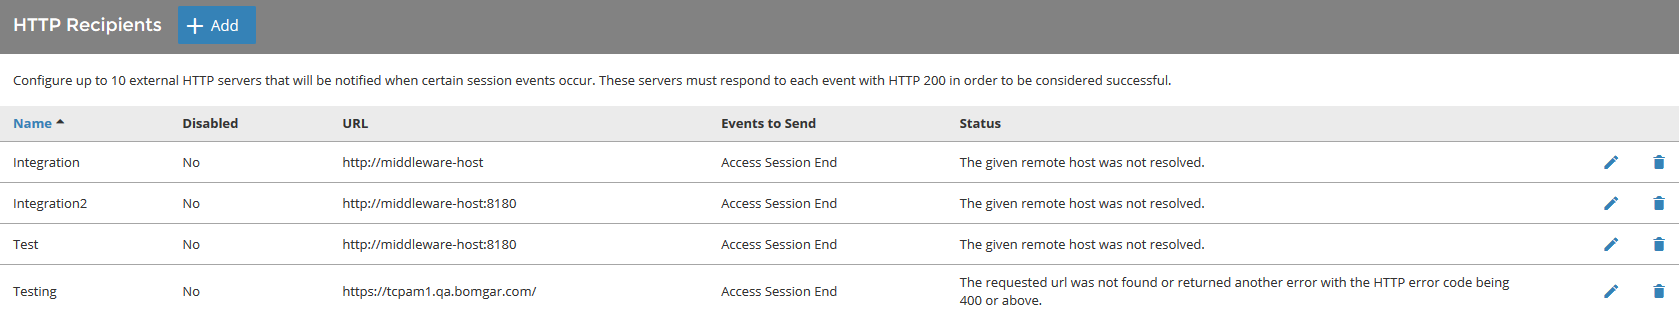 Outbound Events > HTTP Recipients